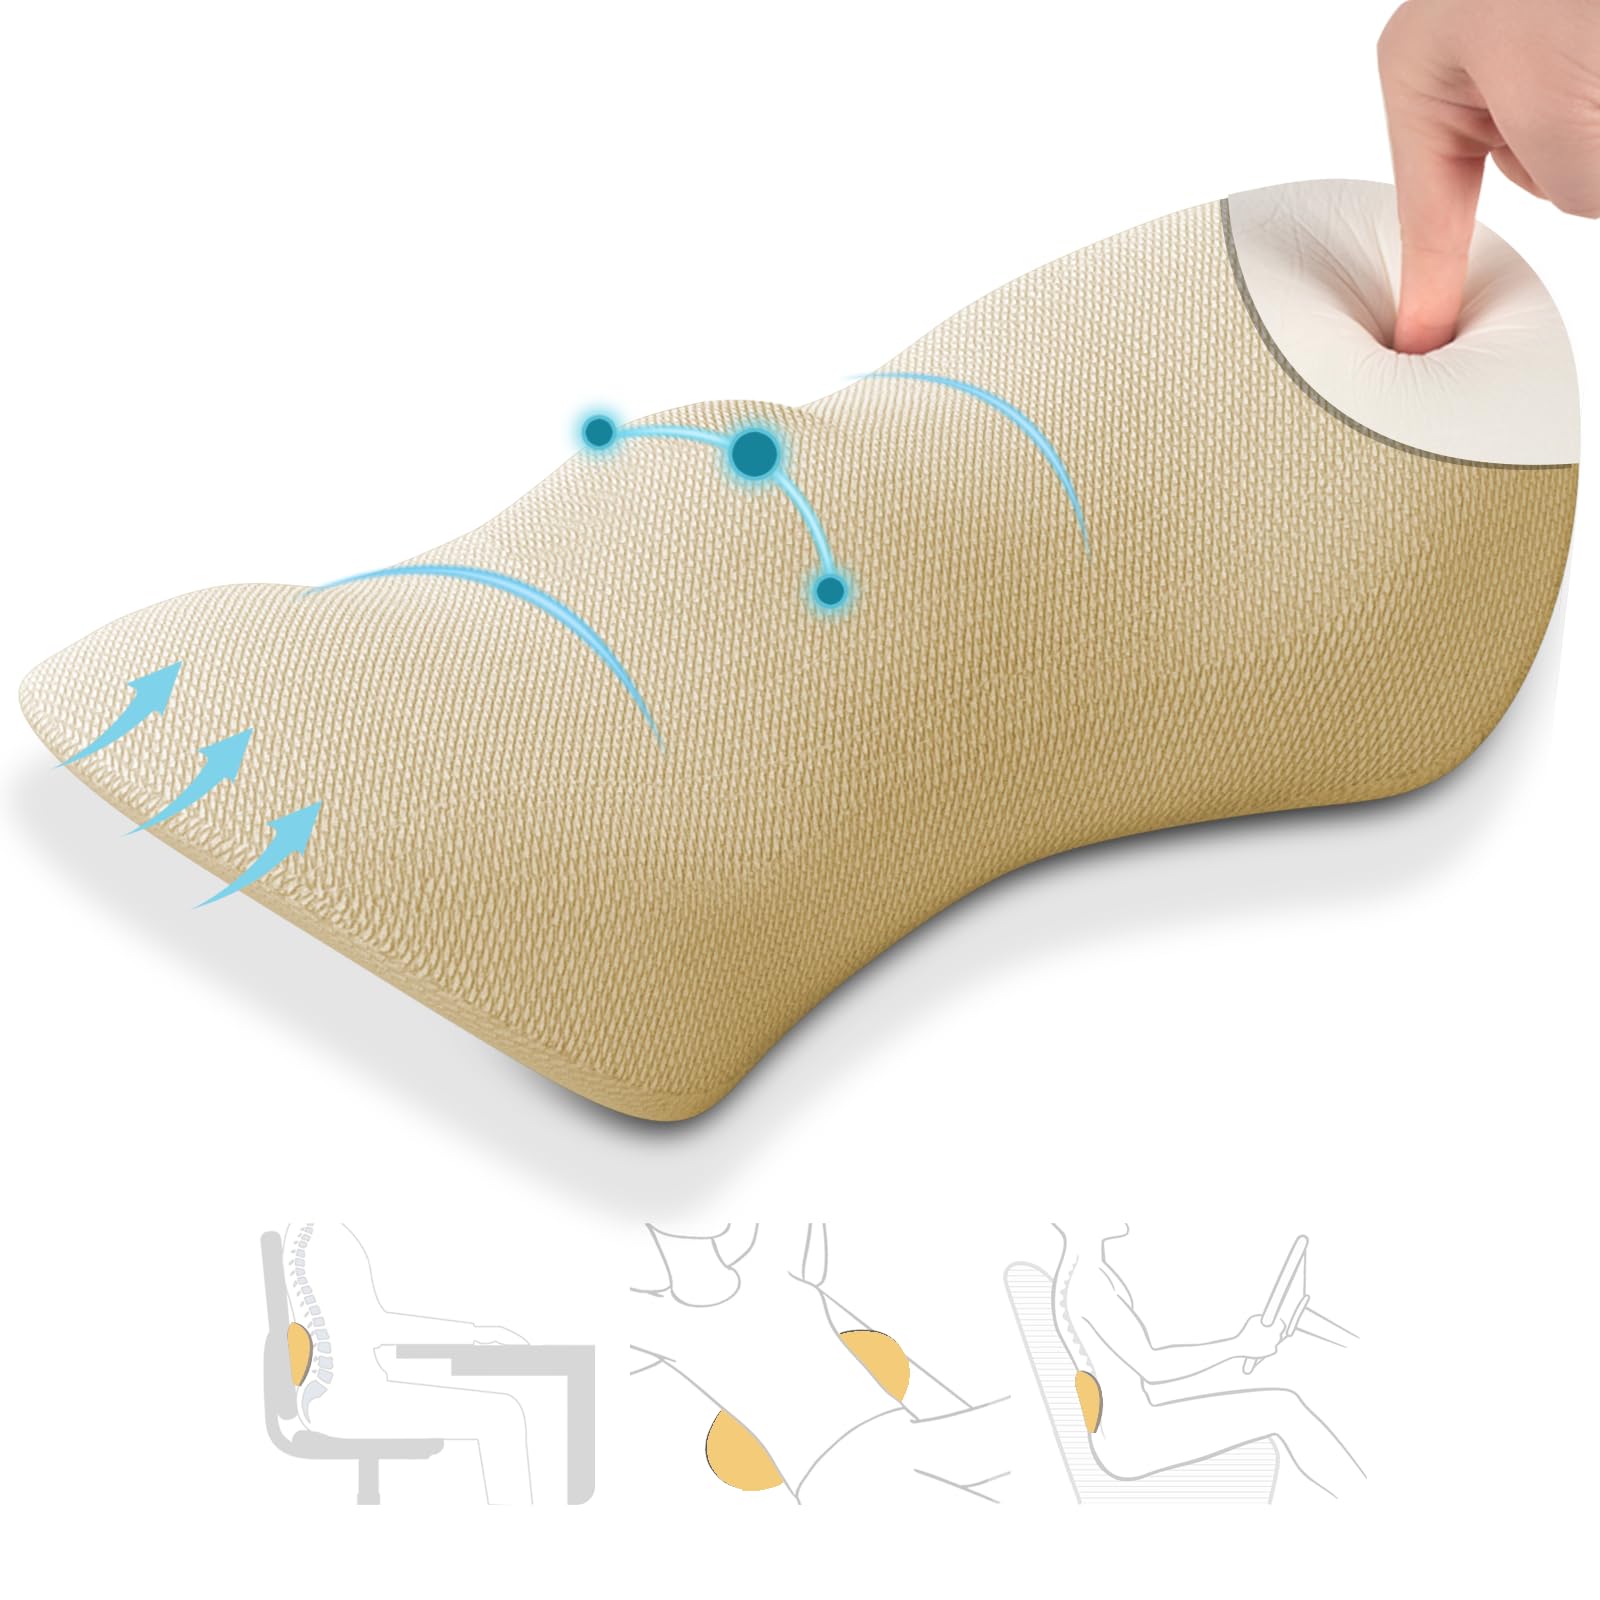 kasney Lumbar Support Pillow for Chair, Comfortable Low Back